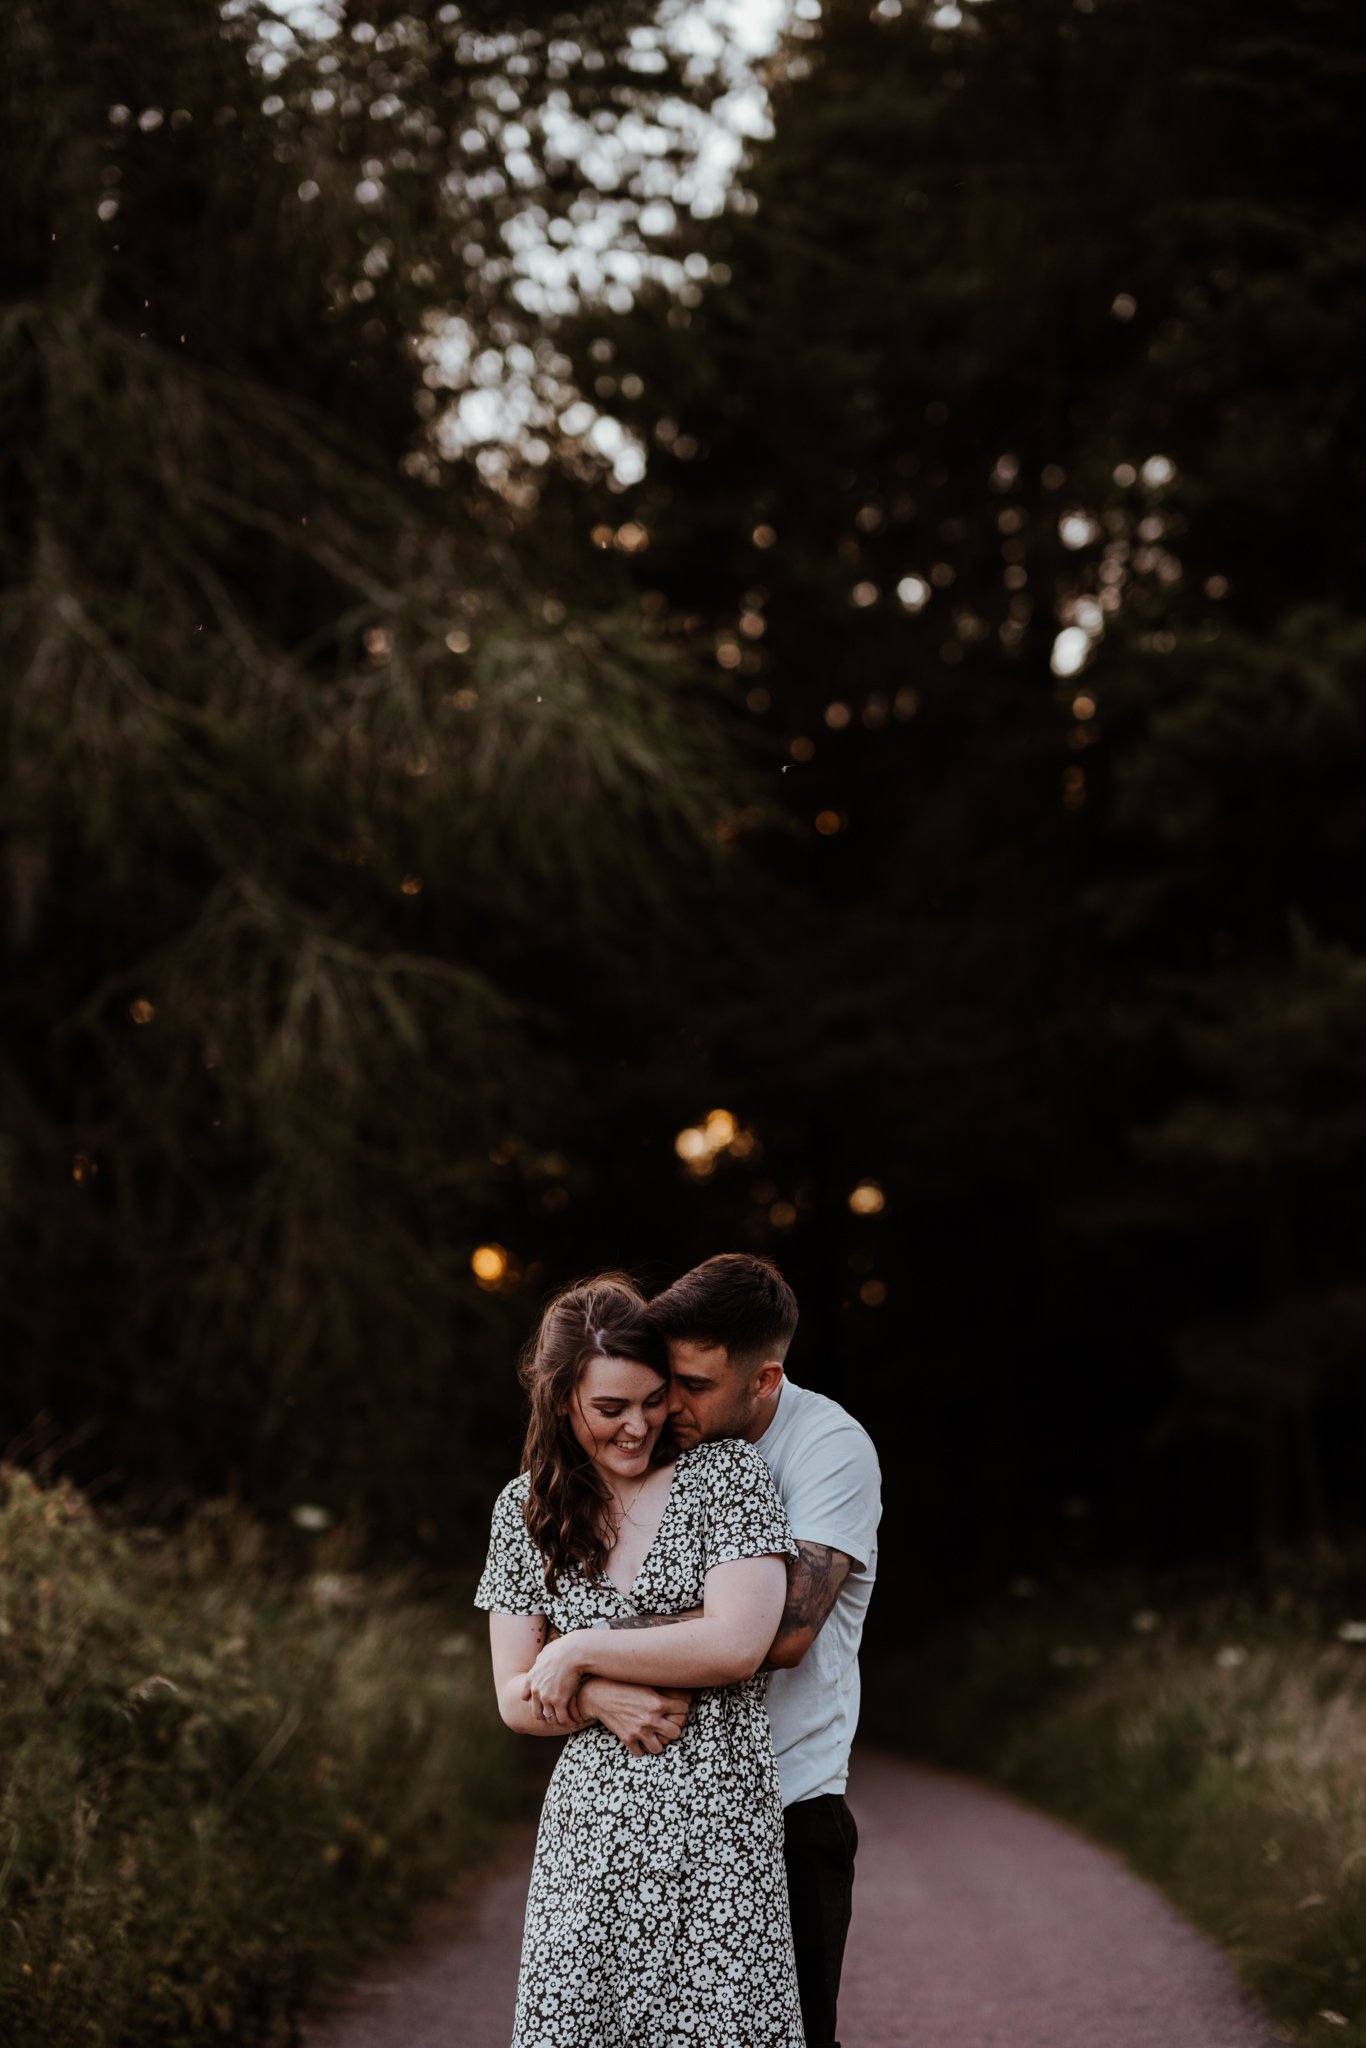 Angus Scotland Engagement and Wedding Photographer - Emily and Gabriel - Adventure Couple Session74.jpg